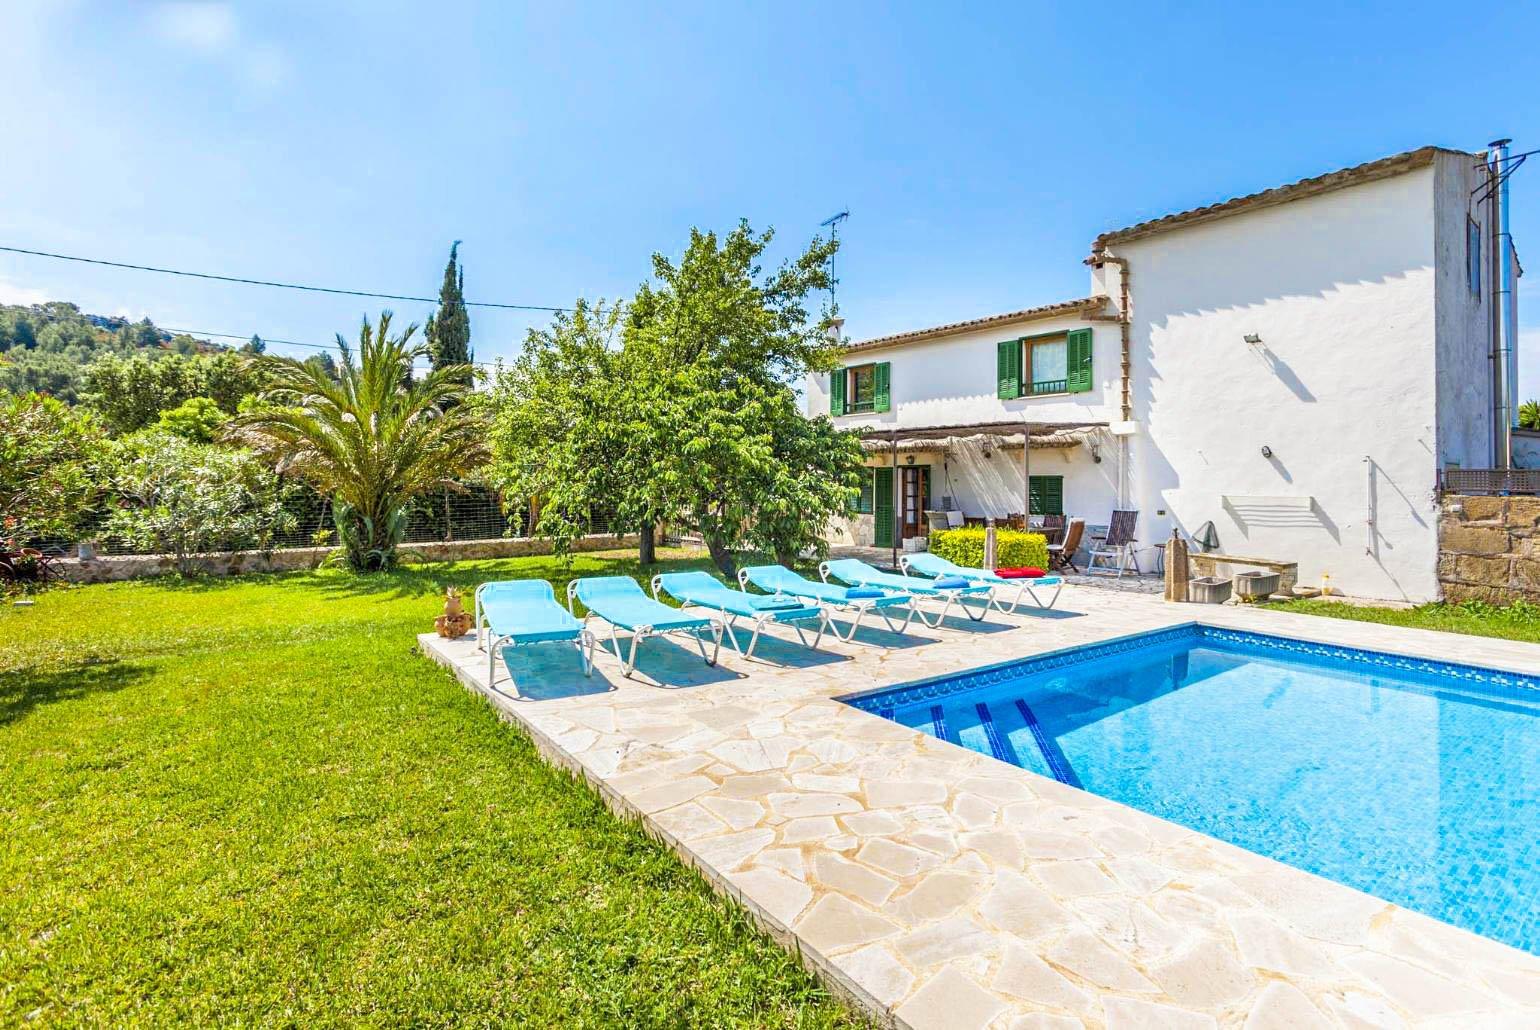 Beautiful villa with private pool, terrace and garden